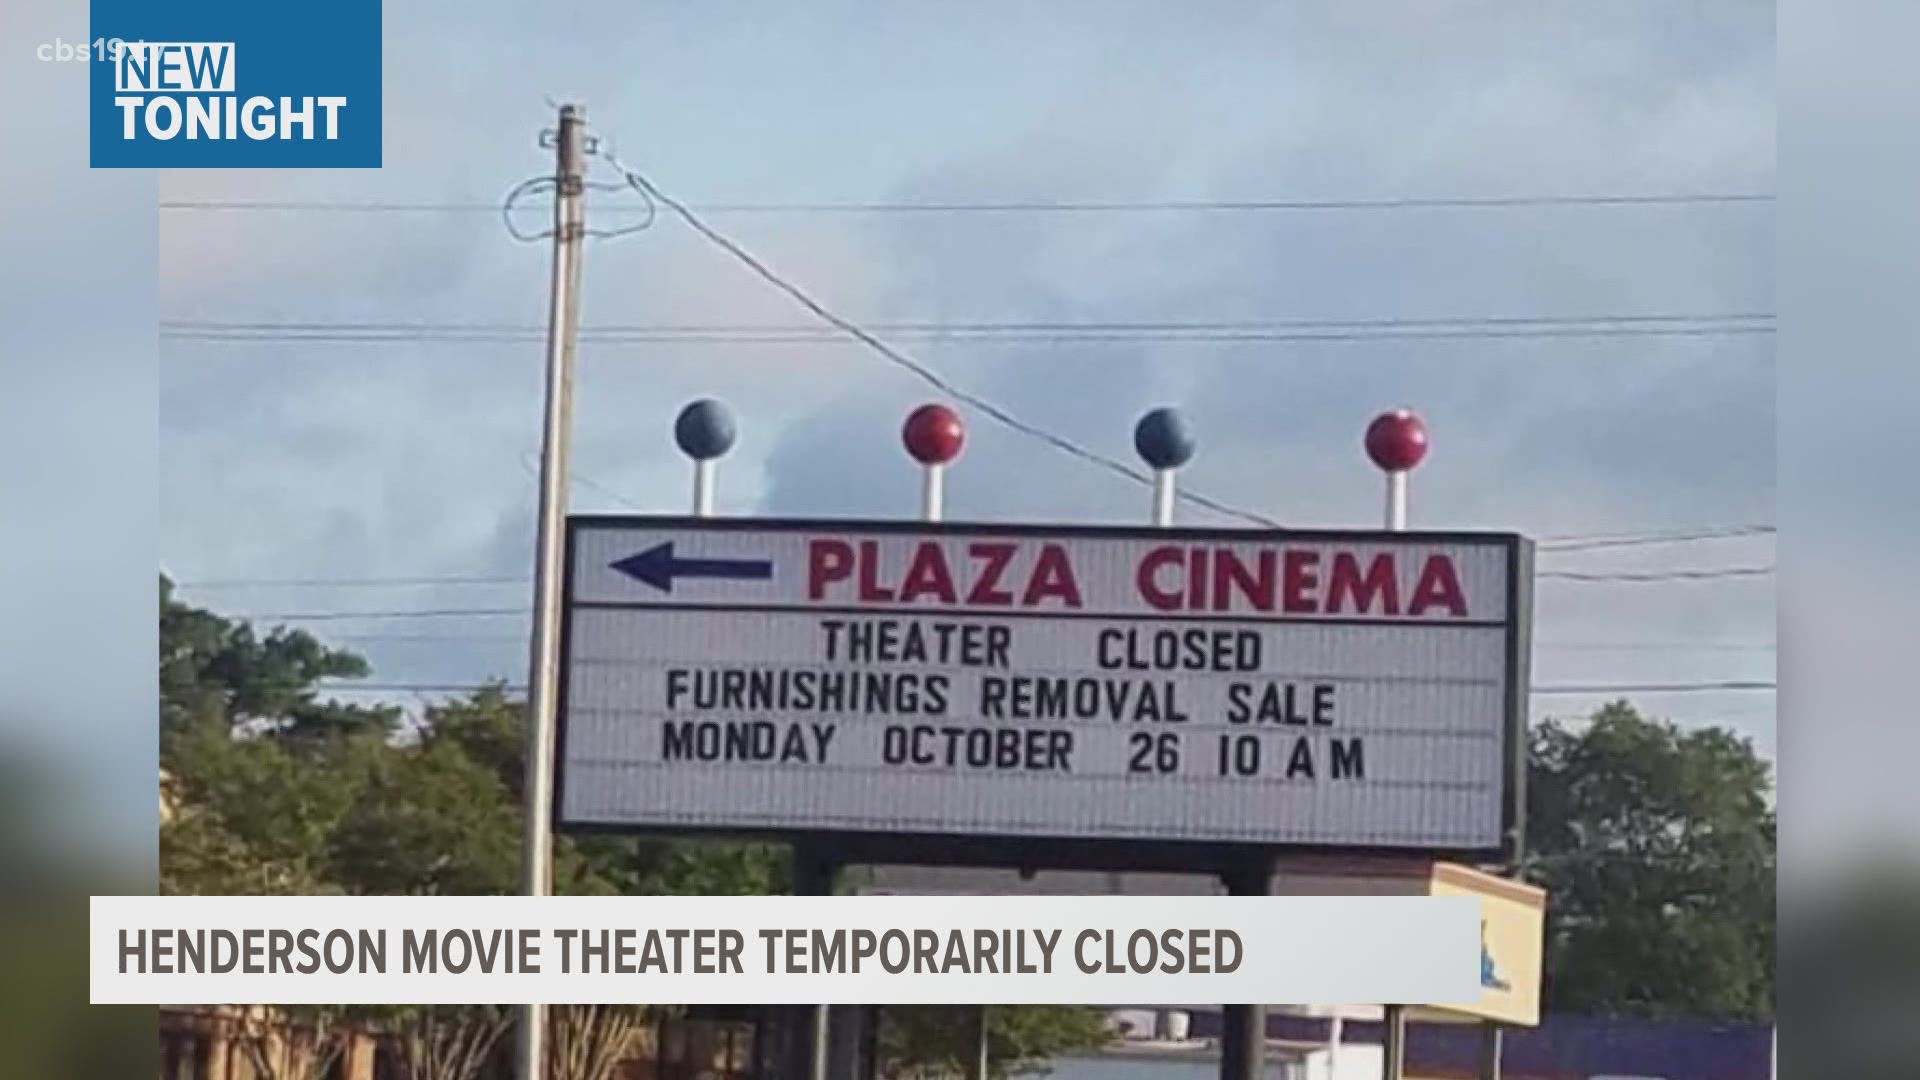 With the temporary closure of Plaza Cinema, the only movie theater in Henderson, community members say the town is lacking entertainment options.